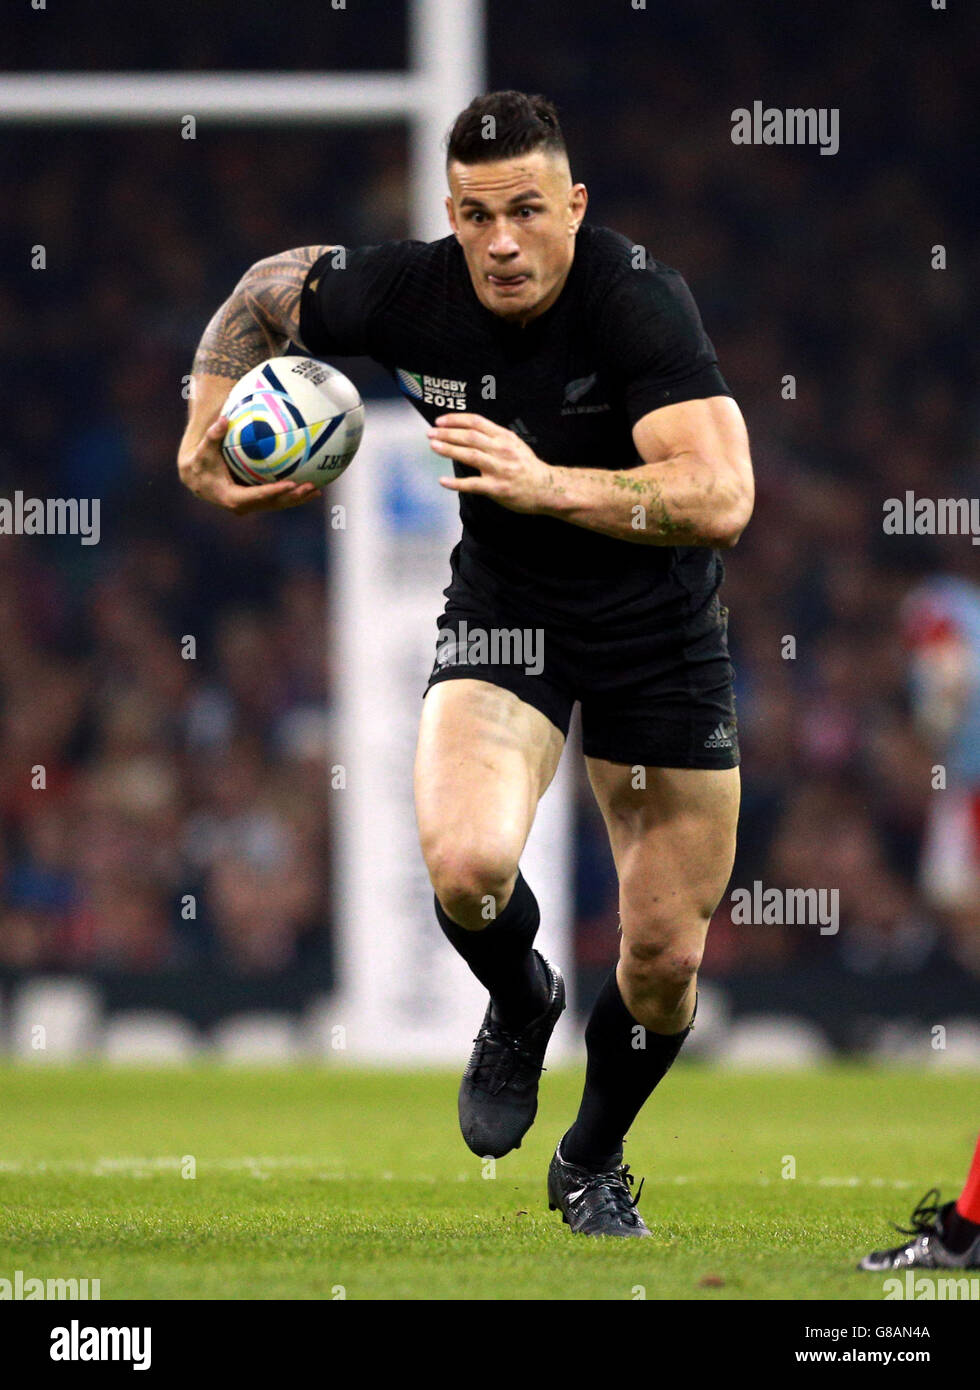 New Zealand's Sonny Bill Williams during the Rugby World Cup match at the Millennium Stadium, Cardiff. PRESS ASSOCIATION Photo. Picture date: Friday October 2, 2015. See PA story RUGBYU New Zealand. Photo credit should read: David Davies/PA Wire. RESTRICTIONS: Use subject to restrictions. No commercial use. No use in books or print sales without prior permission. Stock Photo